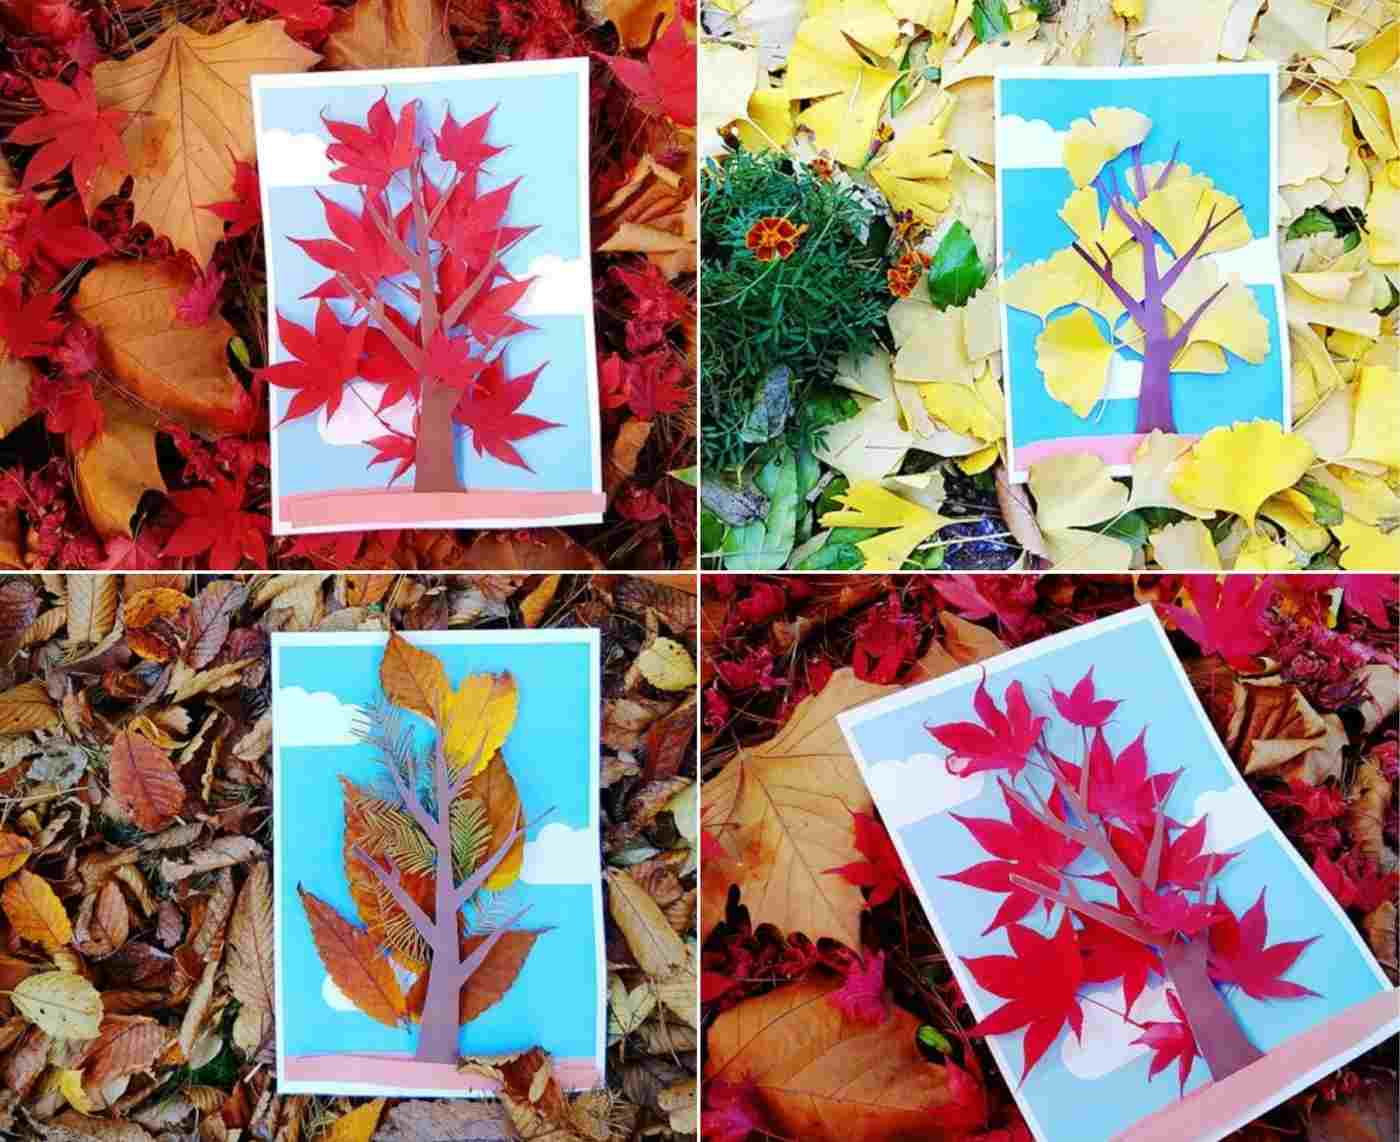 Print a cool tree and stick it with deciduous leaves